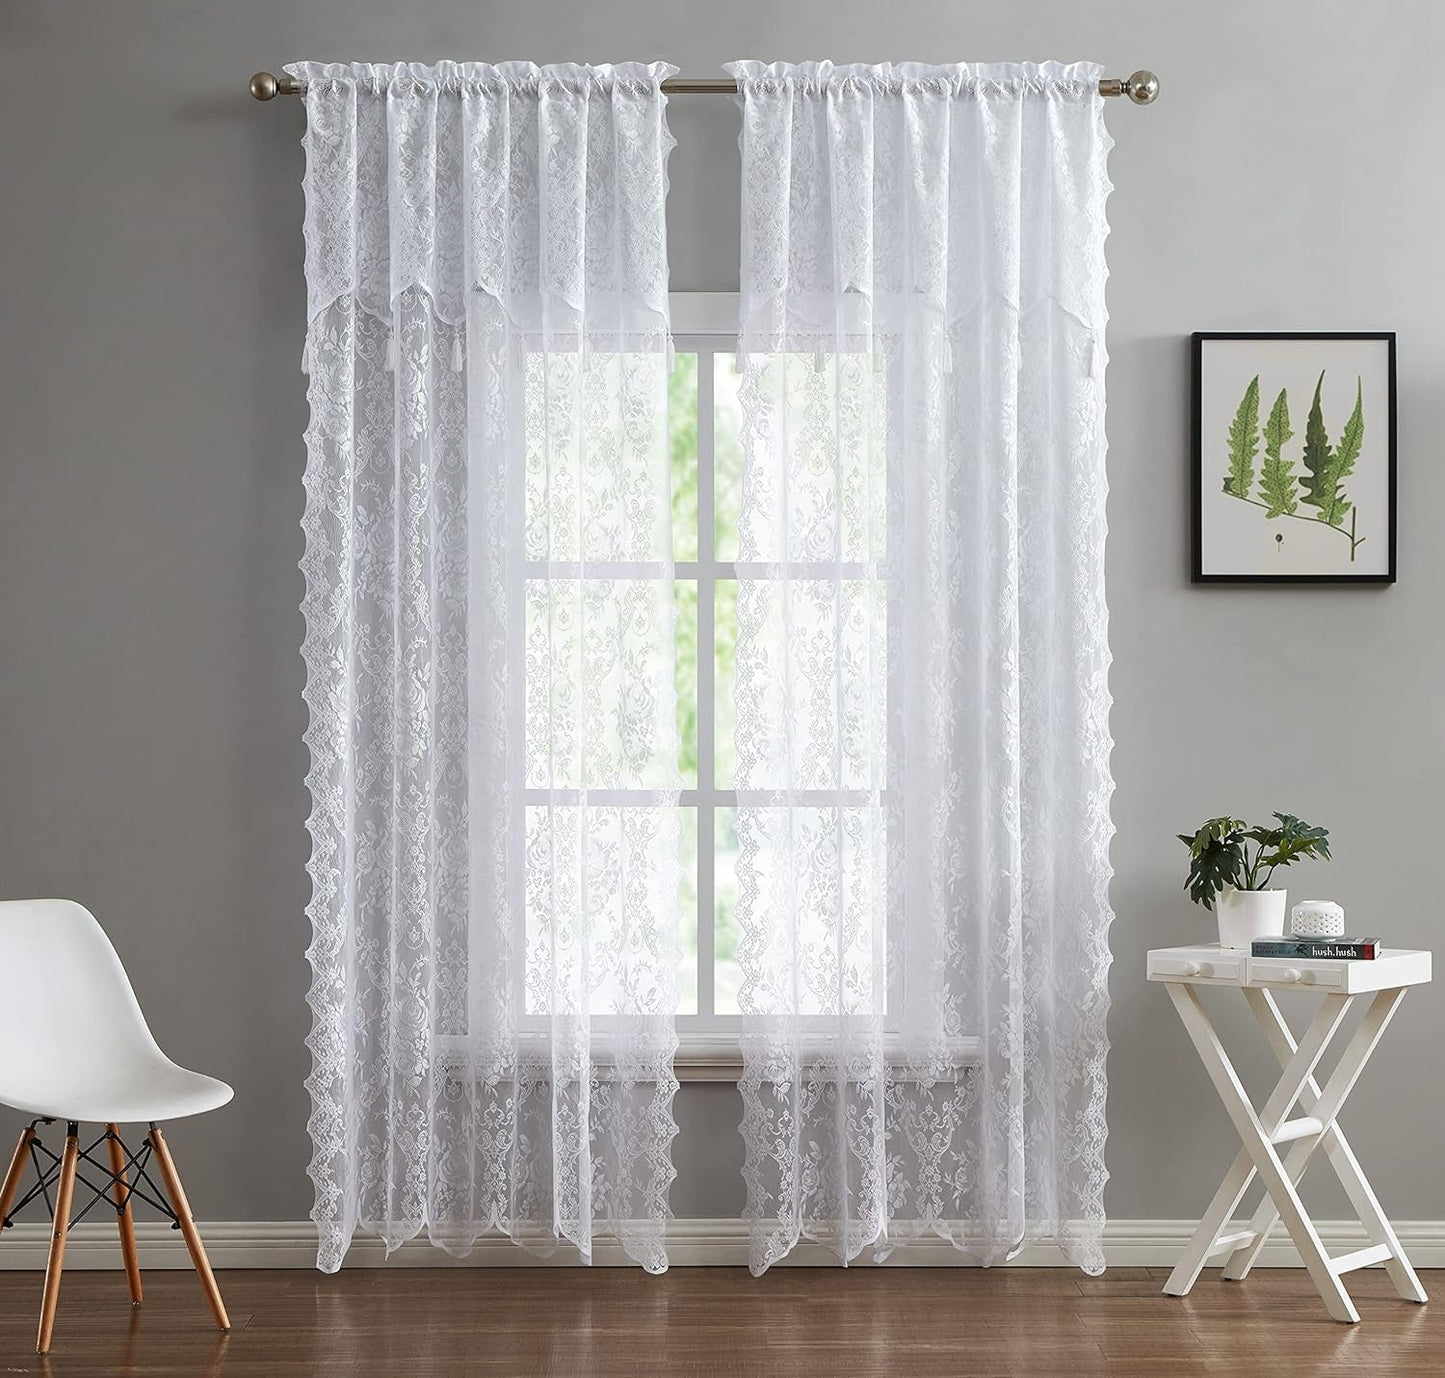 English Rose Design - Lace Semi Sheer Voile Curtain Panels - Voile Valance Rod Pocket with 4 Tassels - for Living Room Bedroom, Bathroom (1 Valance 54" W X 22" L Each, Linen)